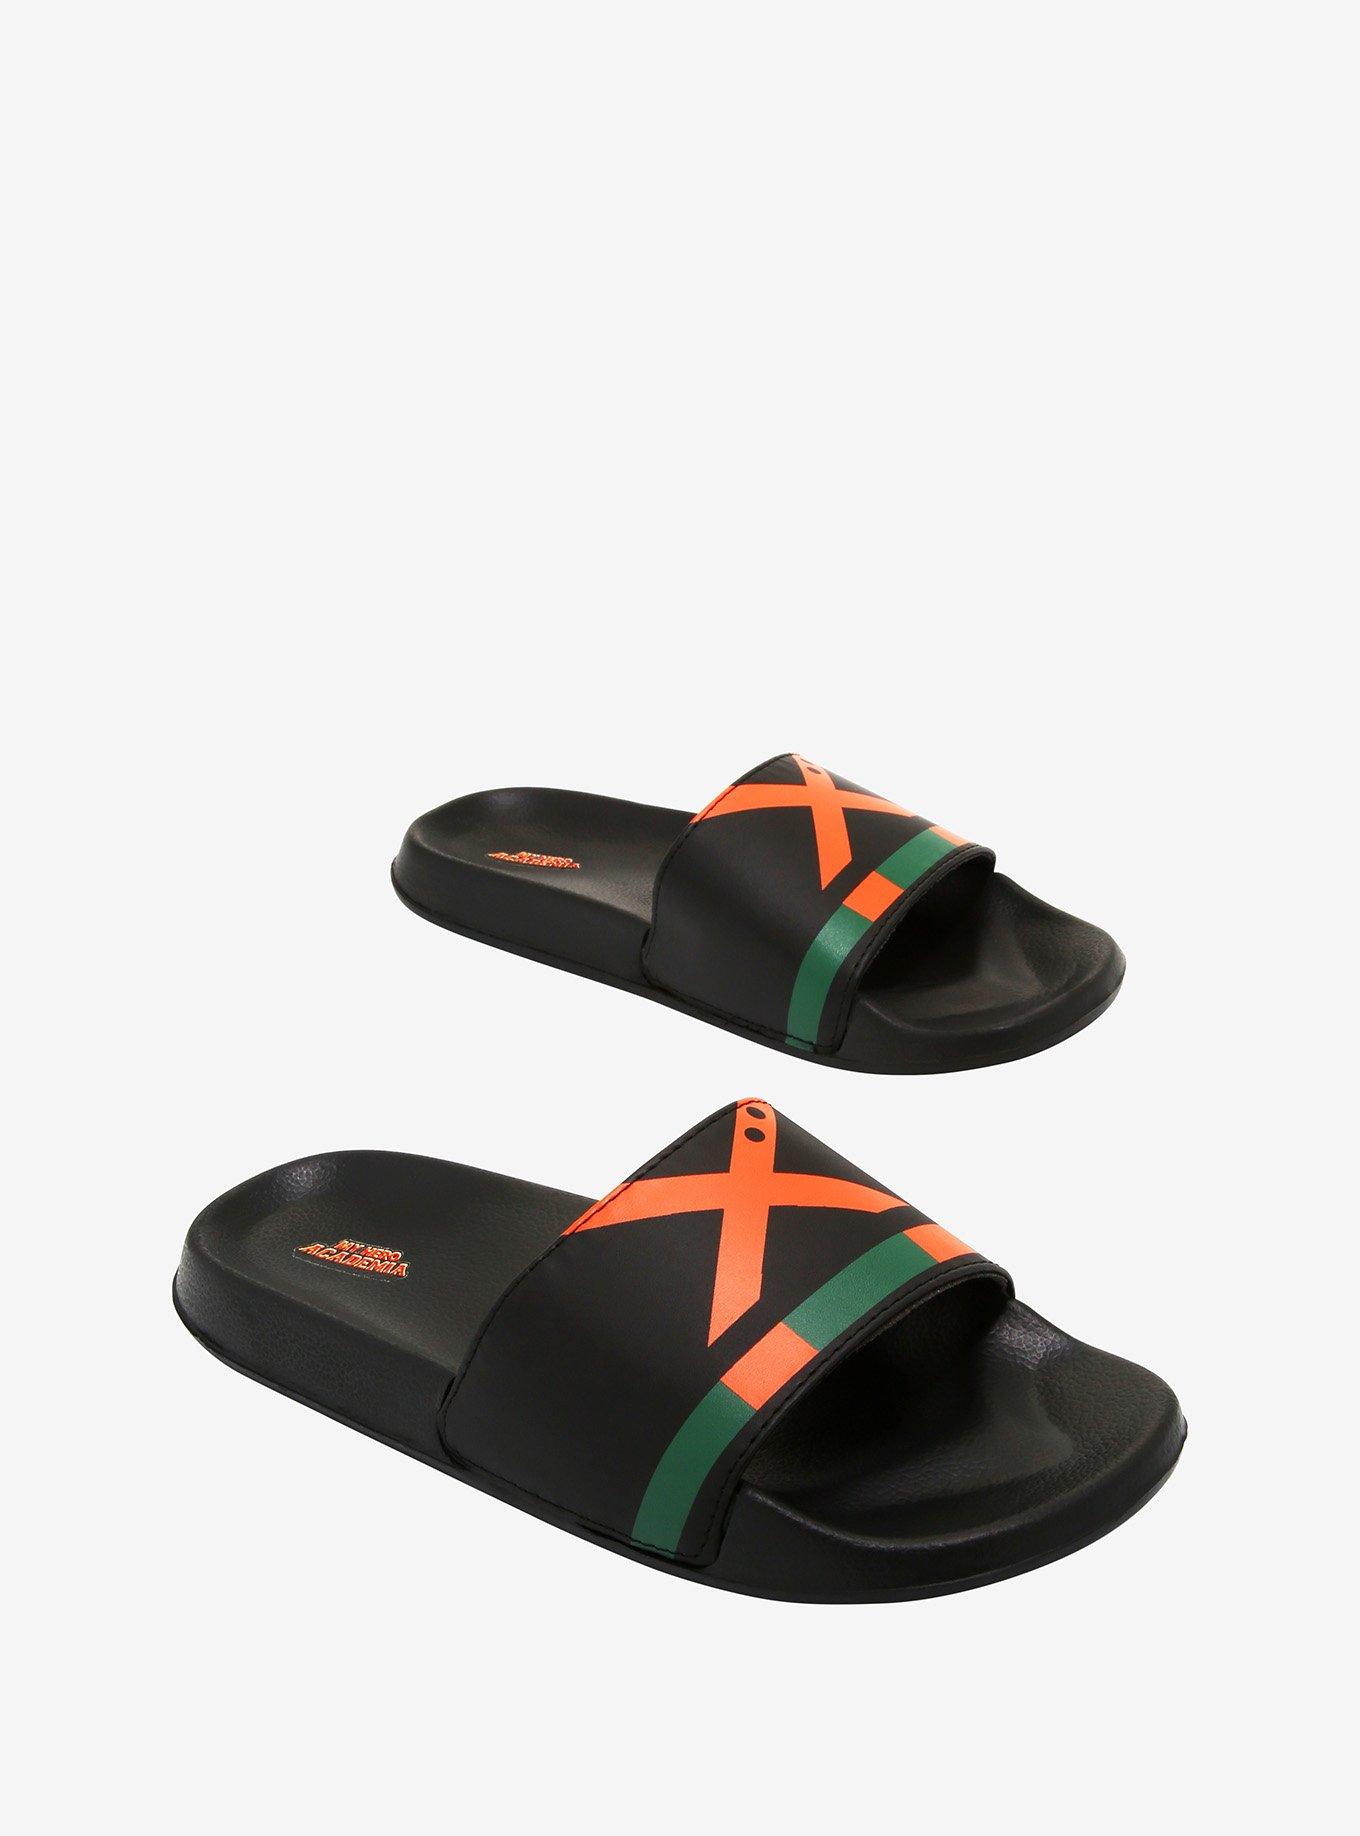 Louis Vuitton men's sandalsthese are the type you play. Trust the House  of Q